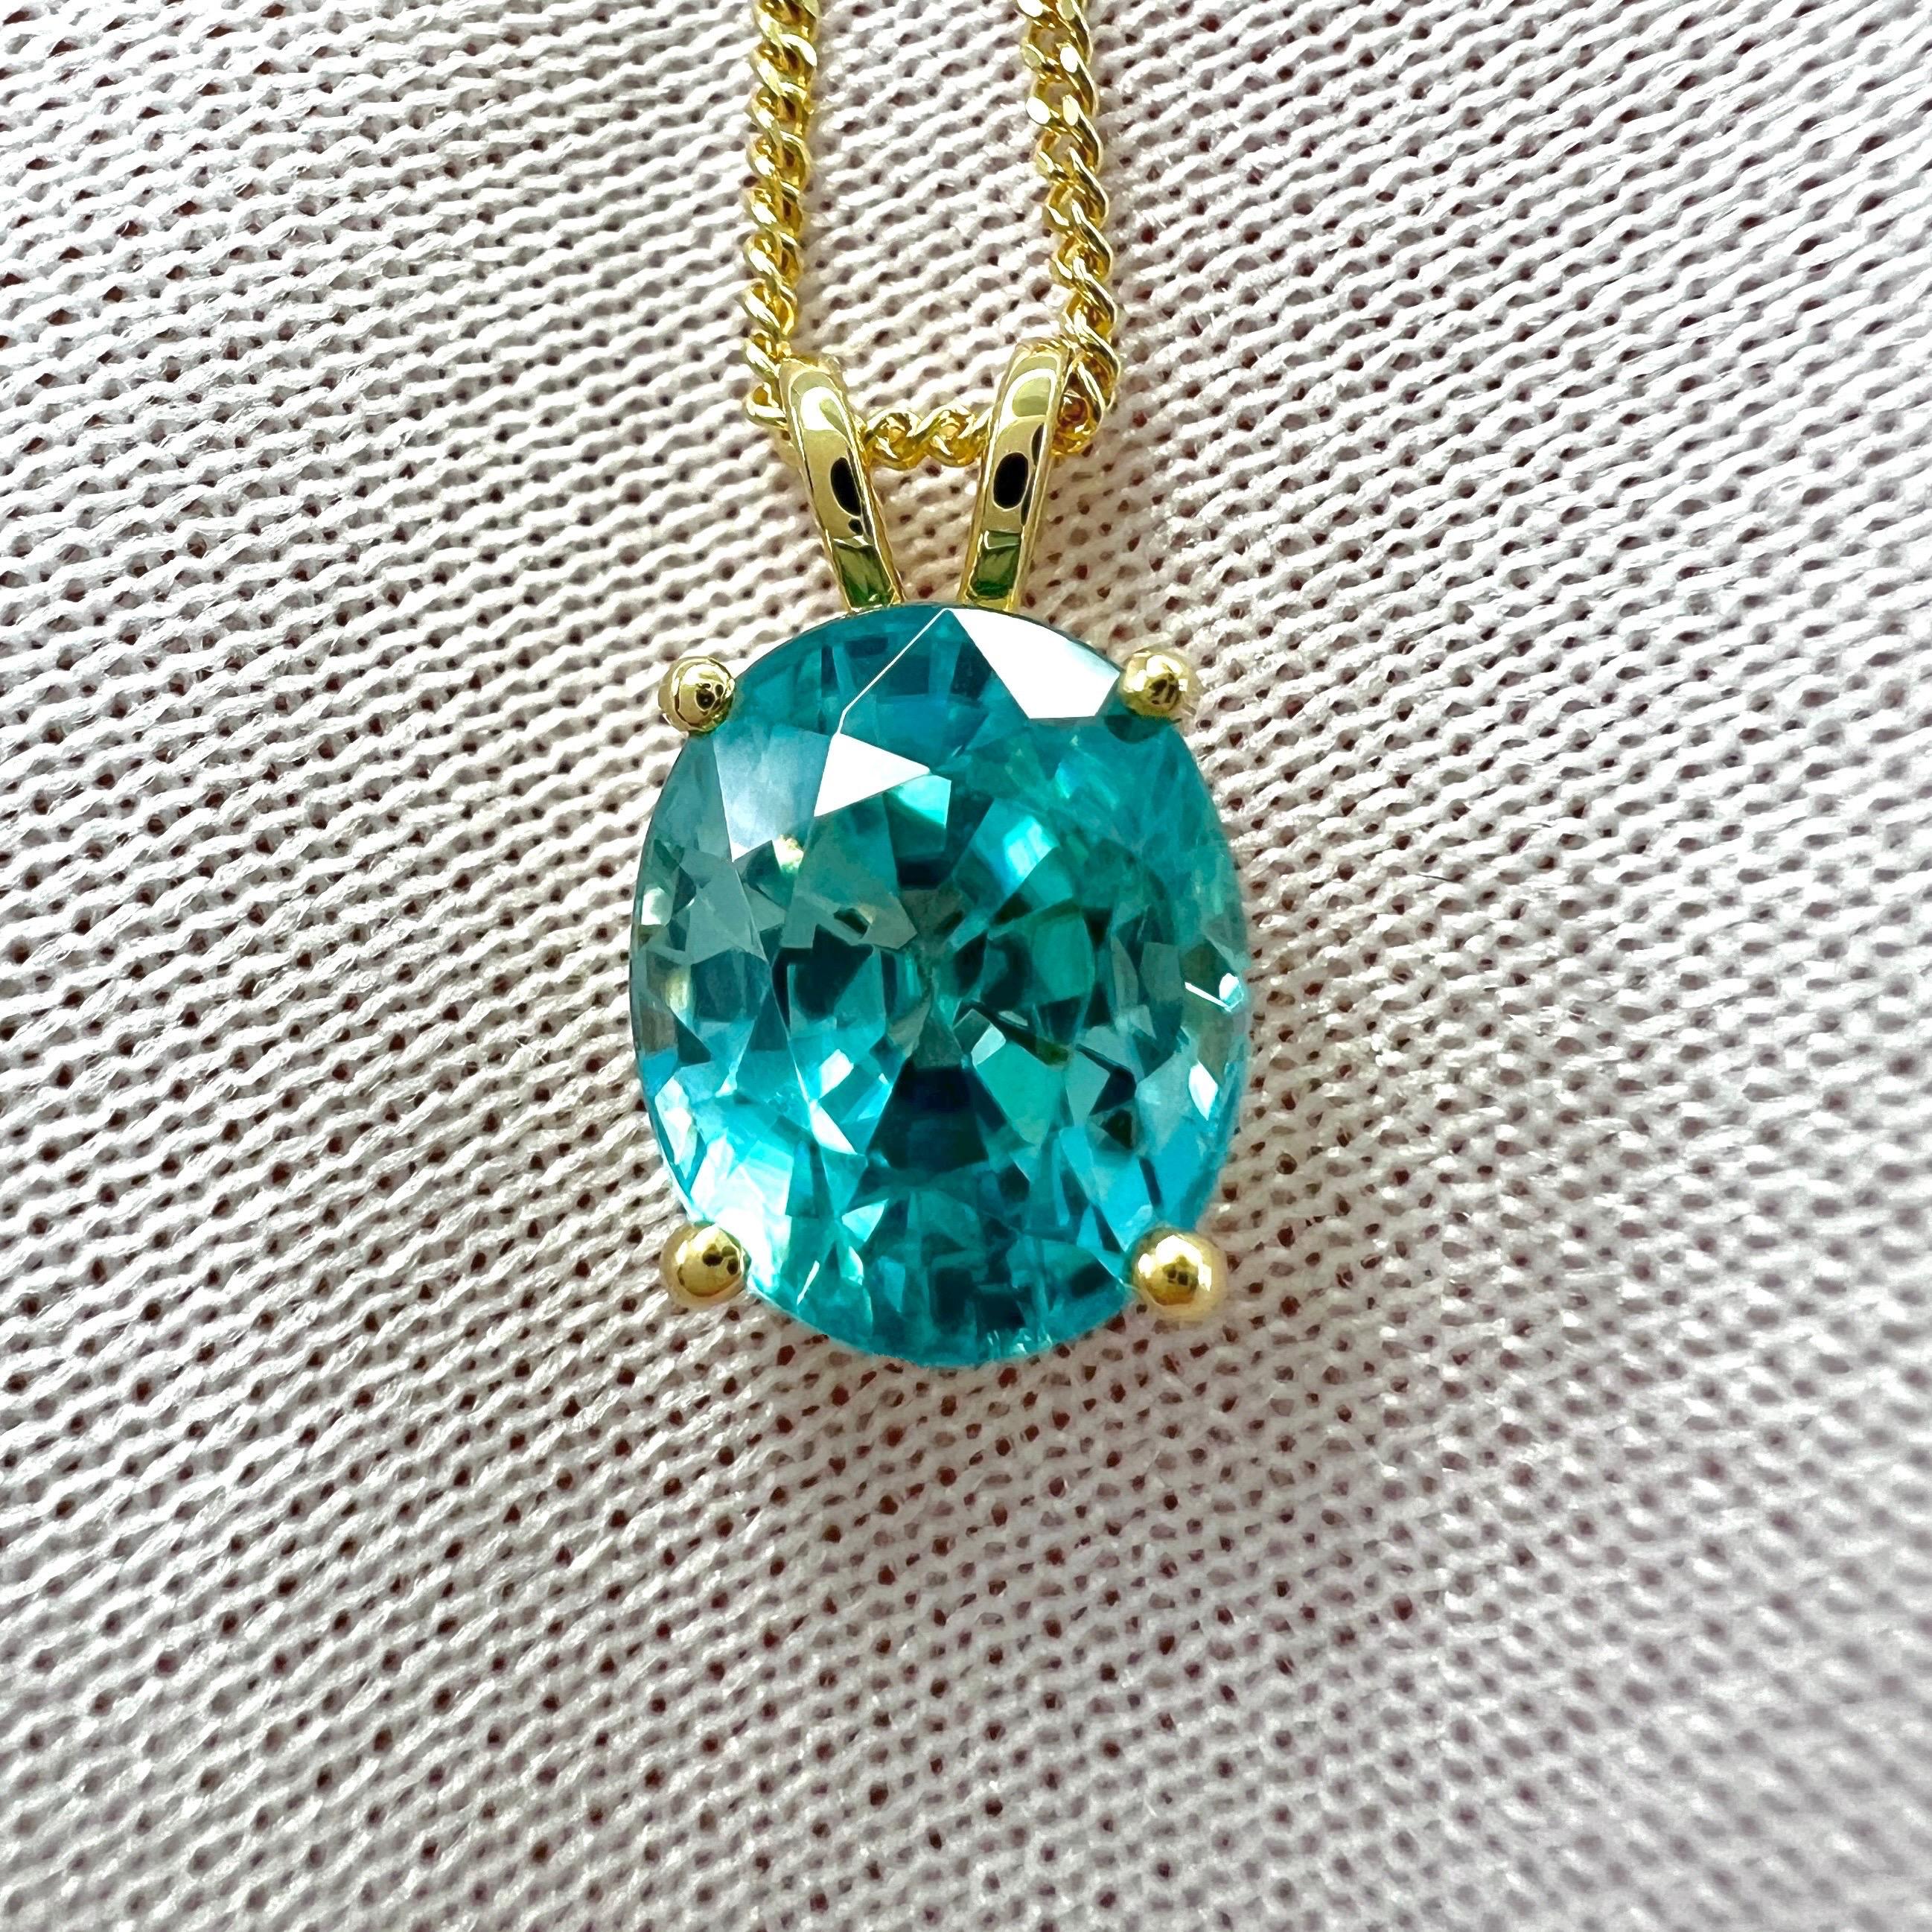 Natural Blue Zircon 3.78ct Oval Cut 18k Yellow Gold Pendant Necklace For Sale 1